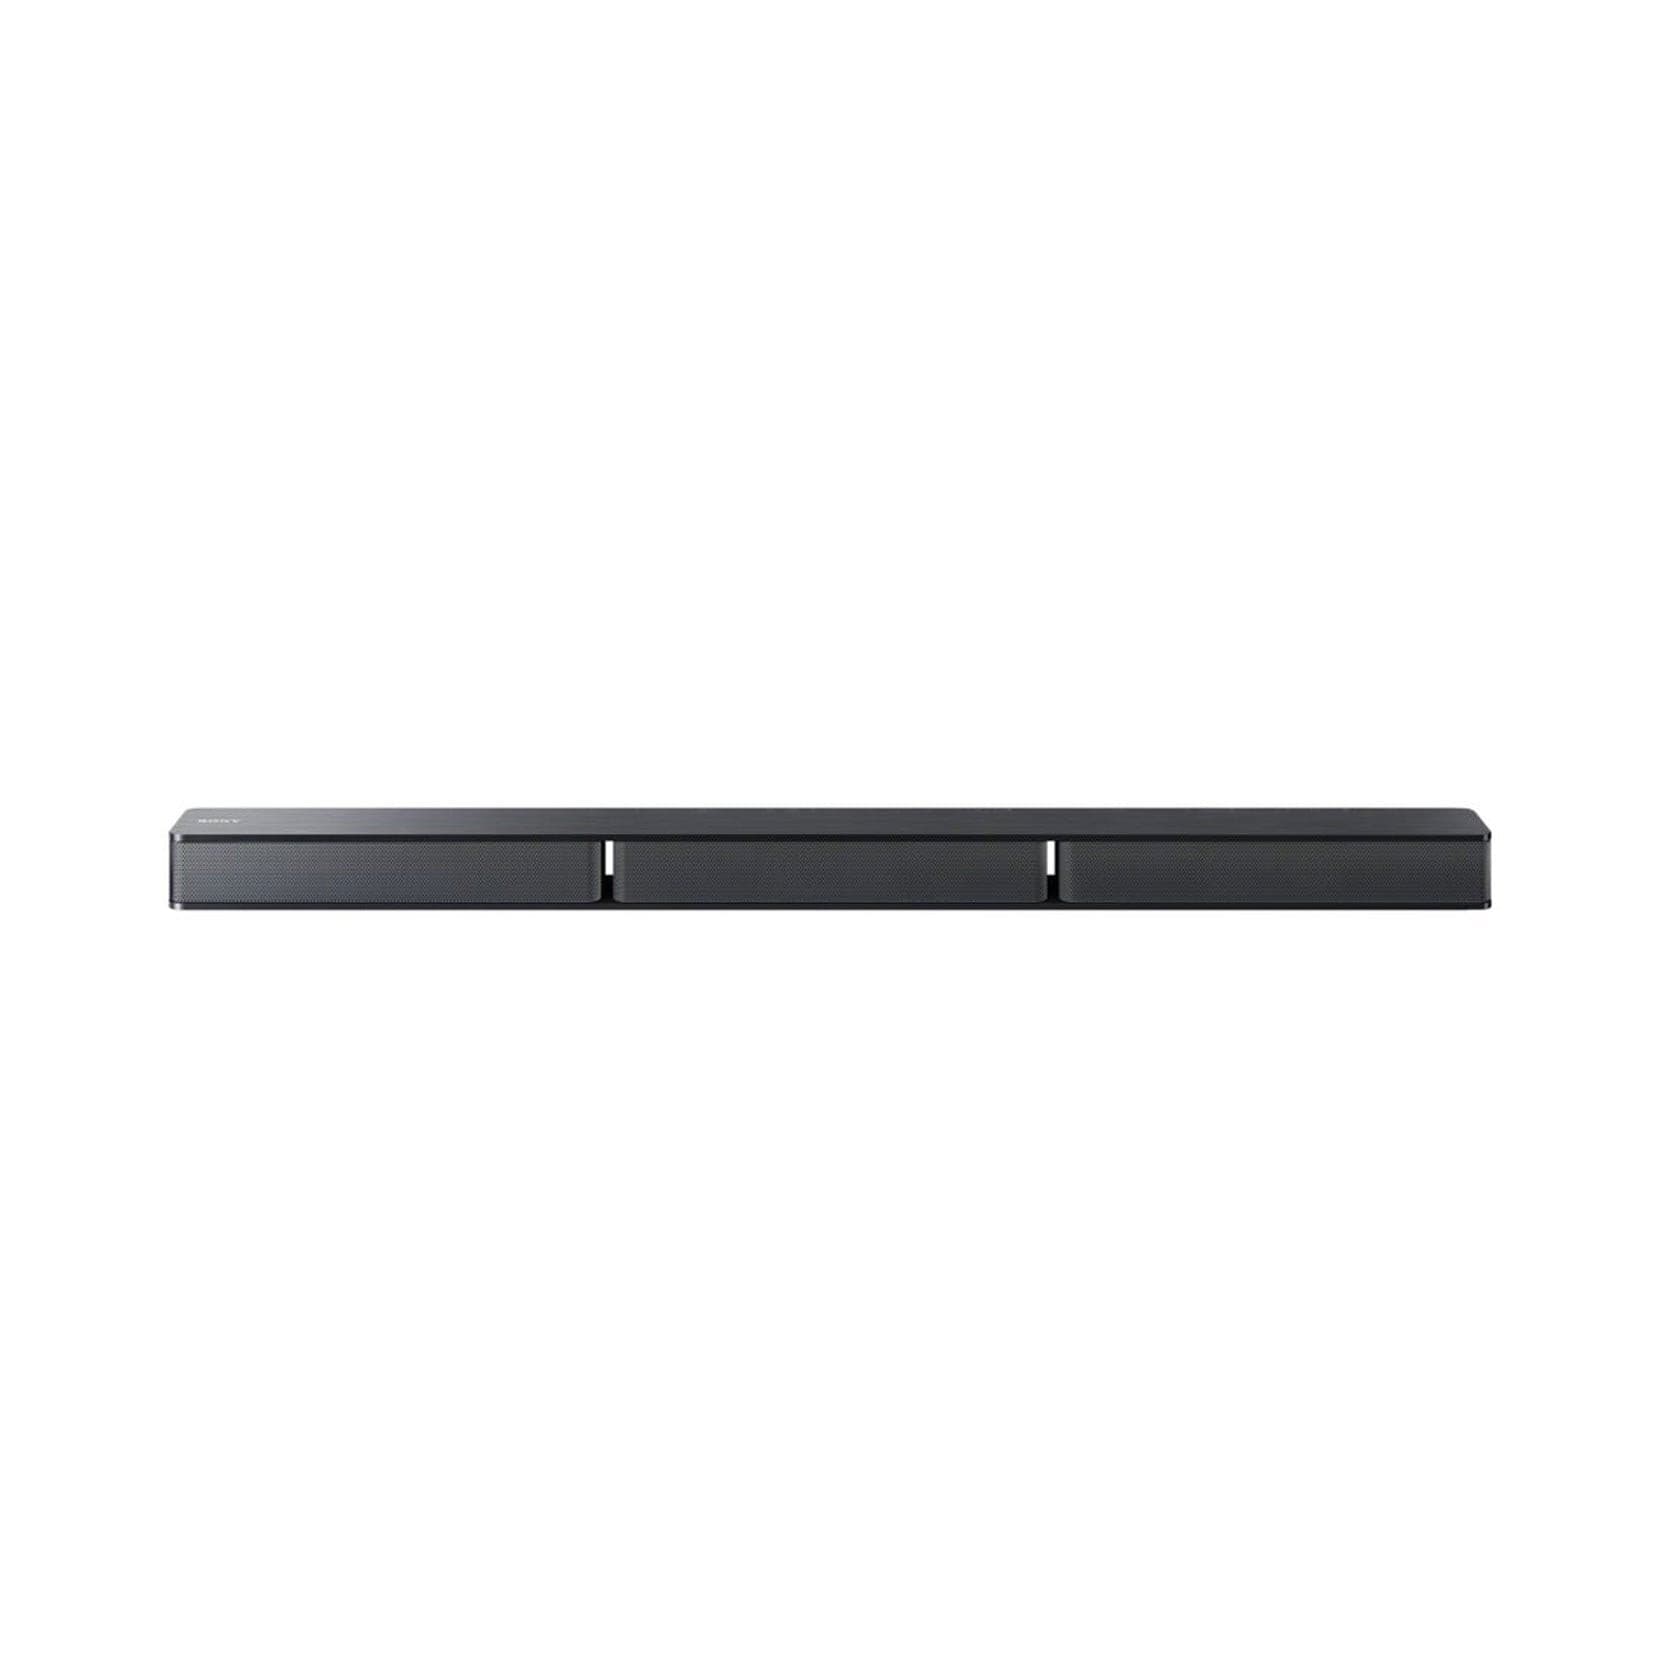 Sony HT-RT3 - Sound bar system - for home theater - 5.1-channel